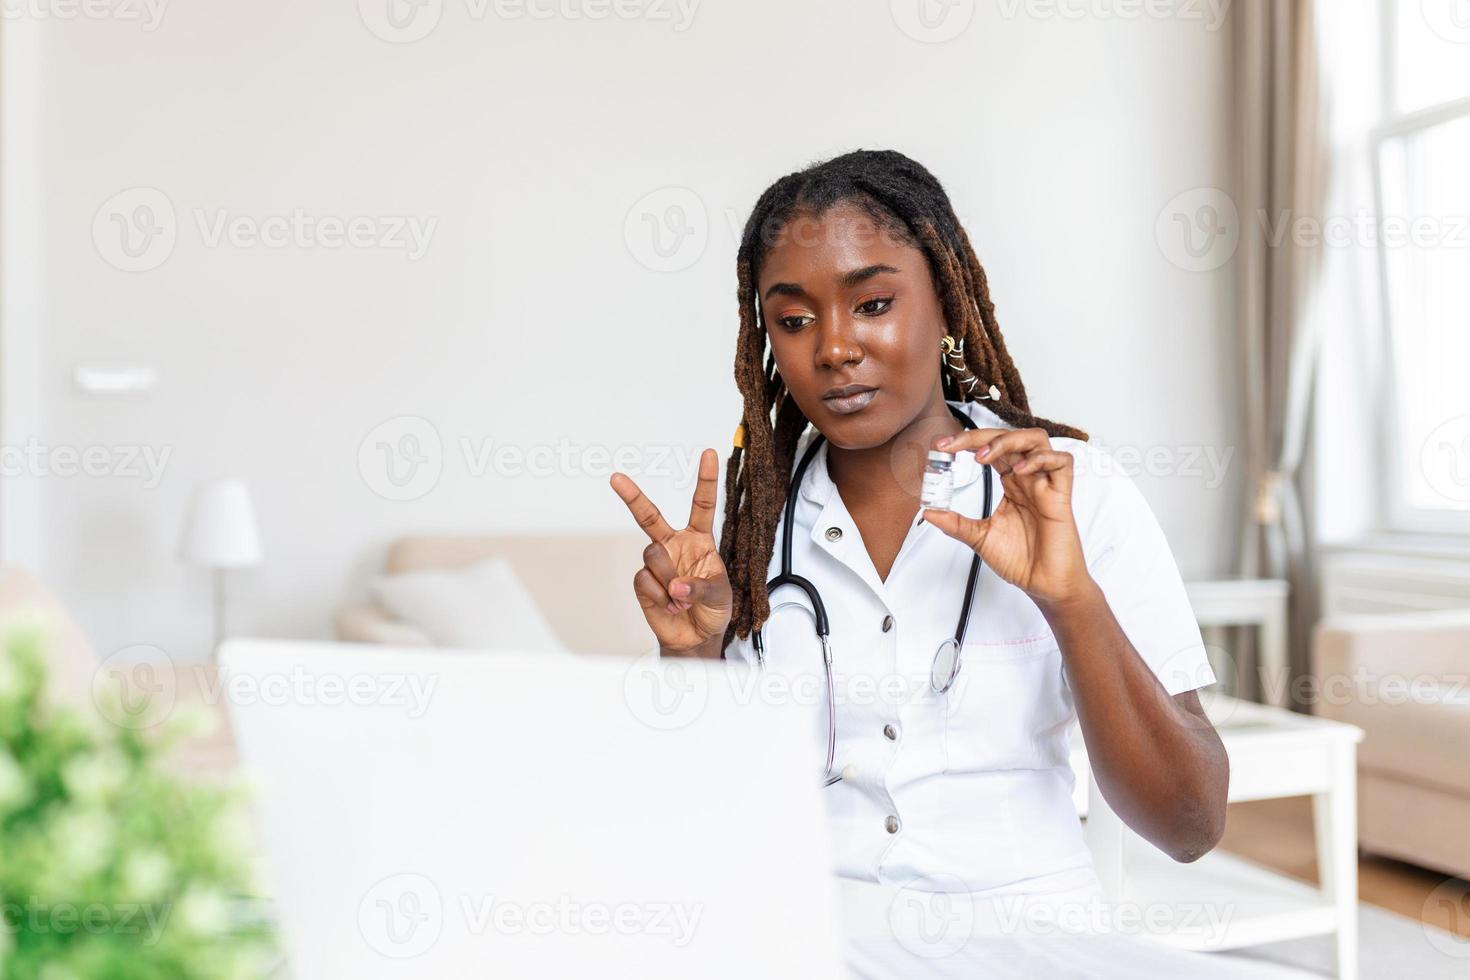 African woman doctor talking online with patient, making video call, looking at camera, young female wearing white uniform with stethoscope speaking, consulting and therapy concept photo